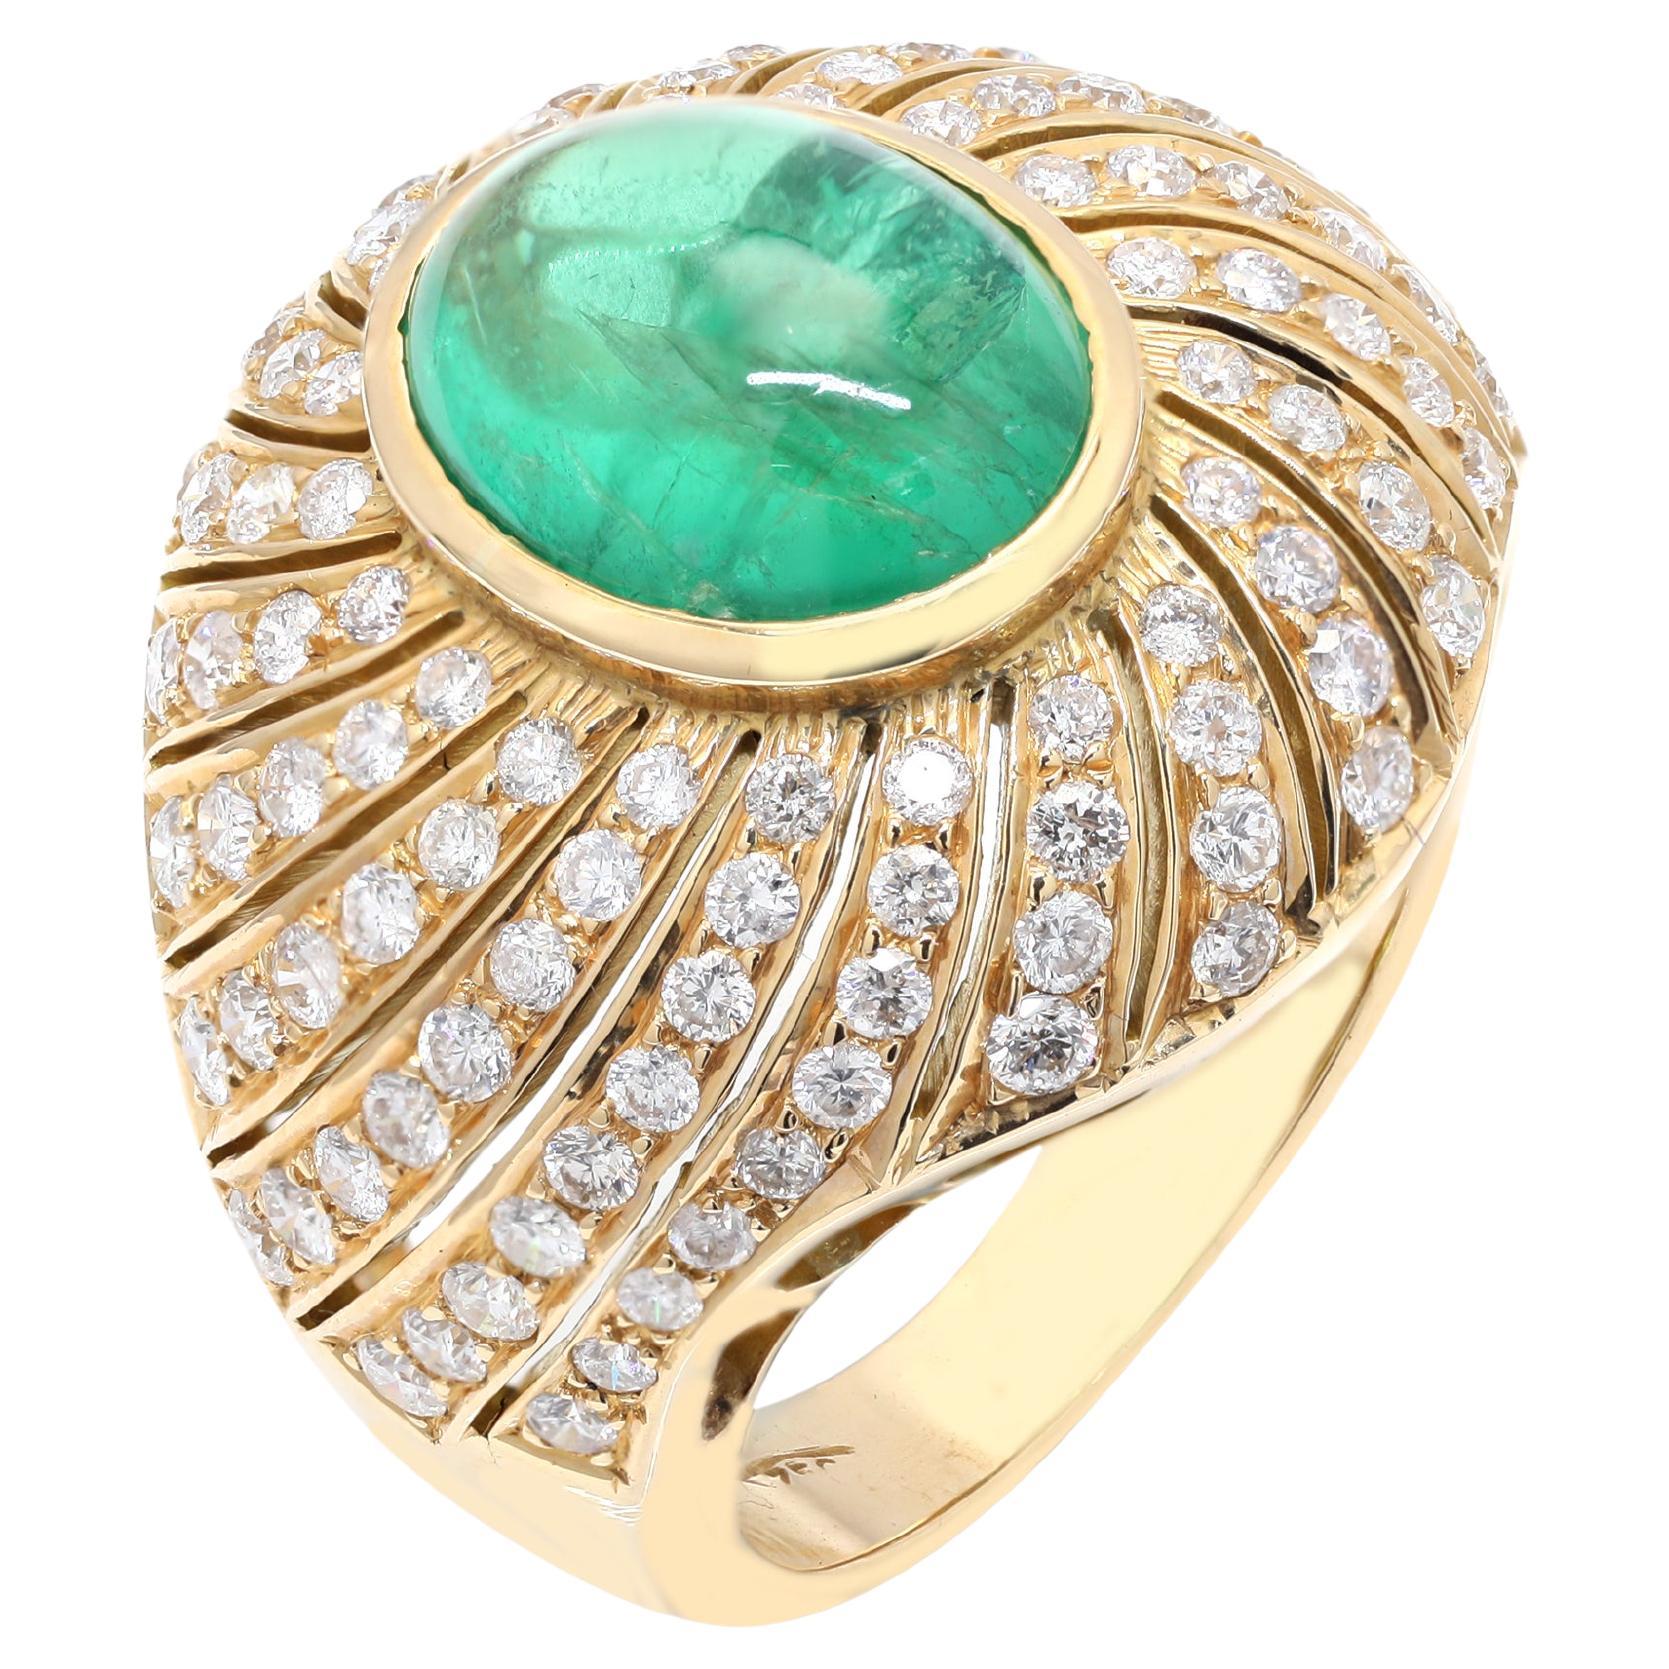 Mesmerizing 4.38 Carat Emerald Cocktail Ring with Diamonds in 18K Yellow Gold